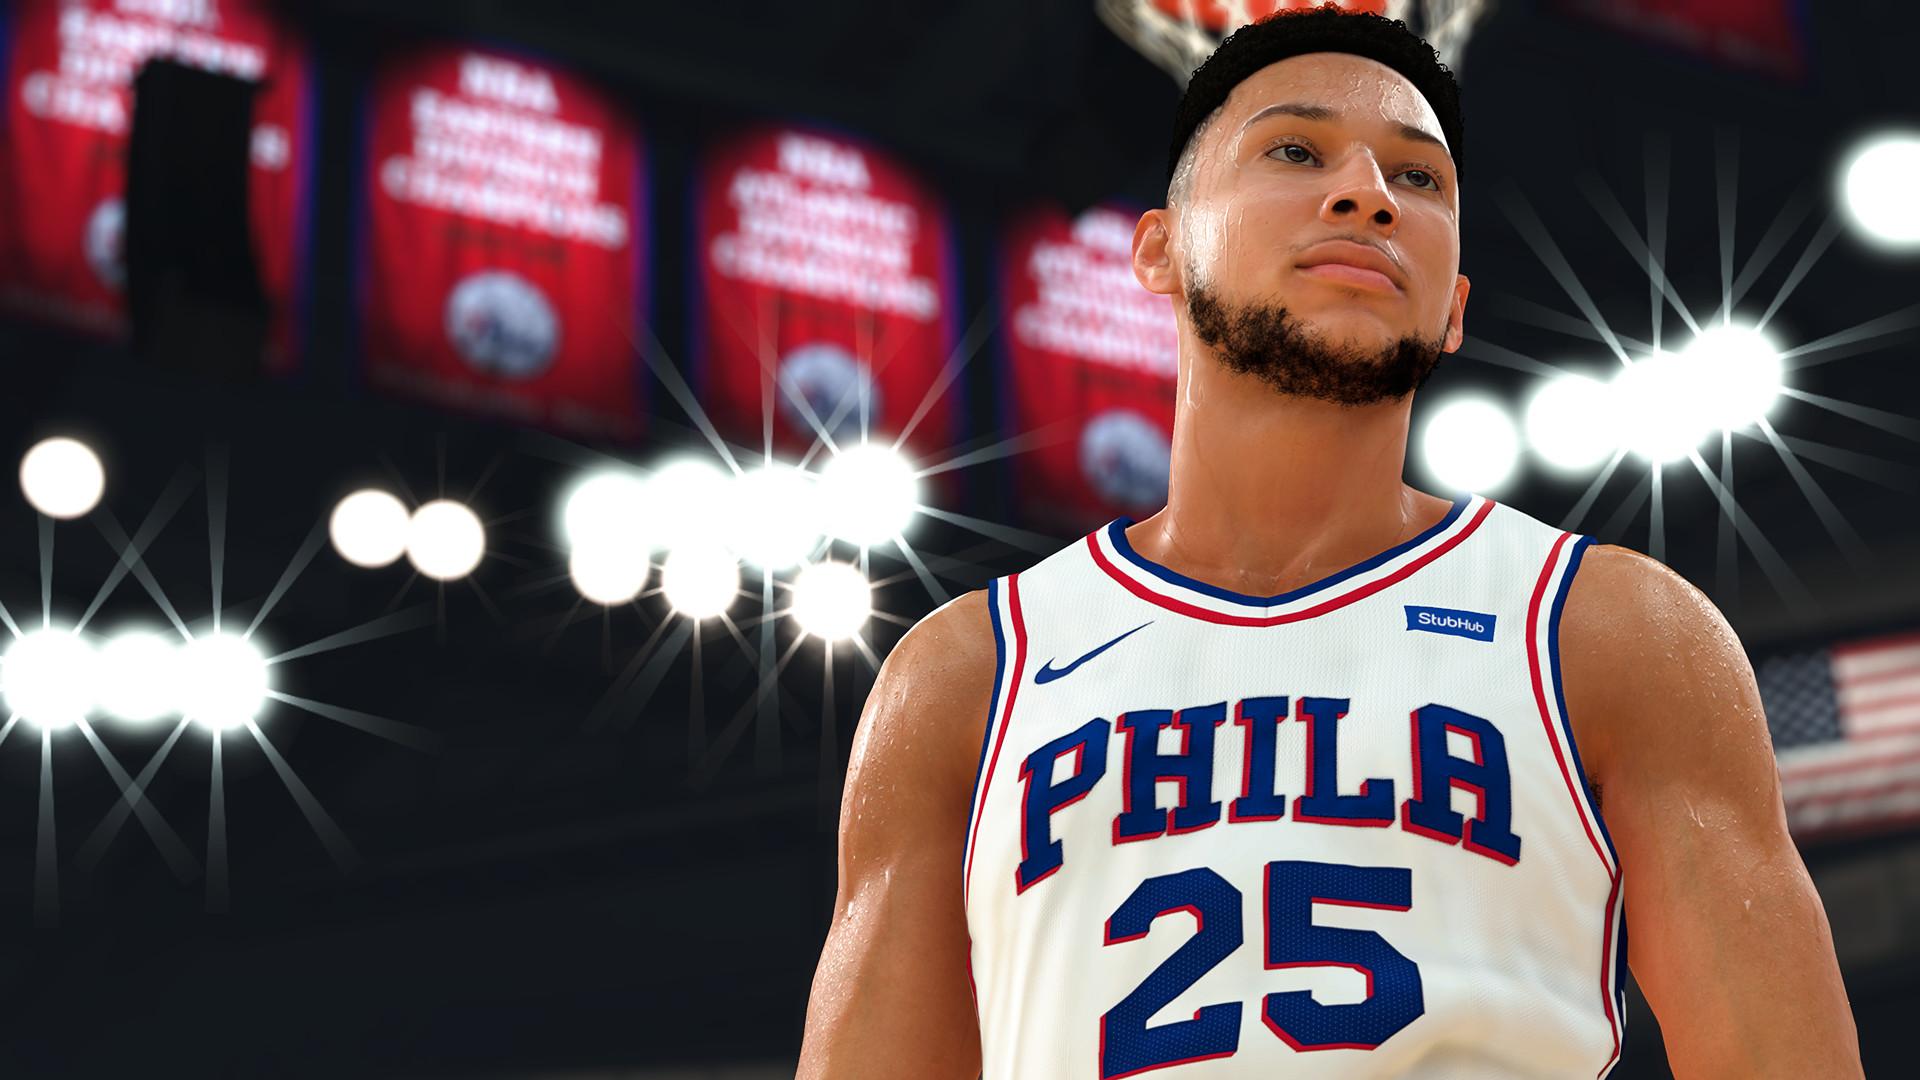 Bizarre NBA 2K20 trailer sells the excitement of lootboxes